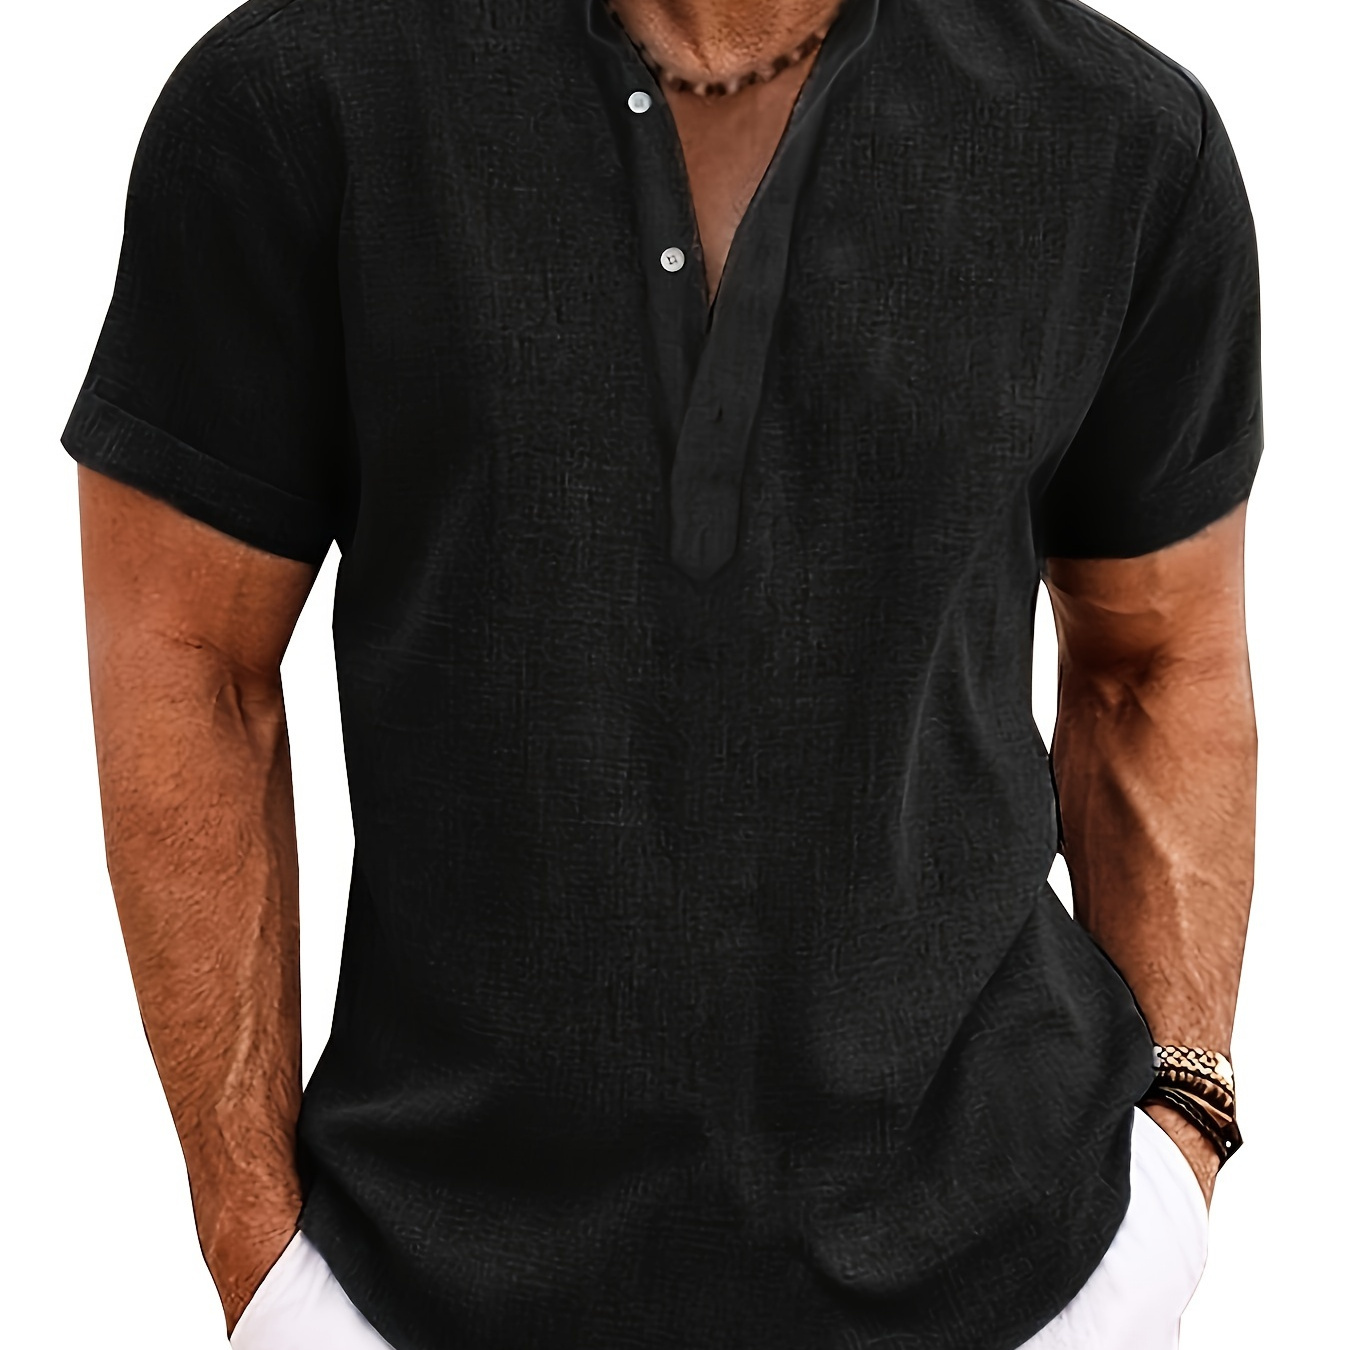 

Plus Size Men's Plain Henley T-shirt, Casual Outdoor Comfy Tops, Clothing For Big & Tall Male